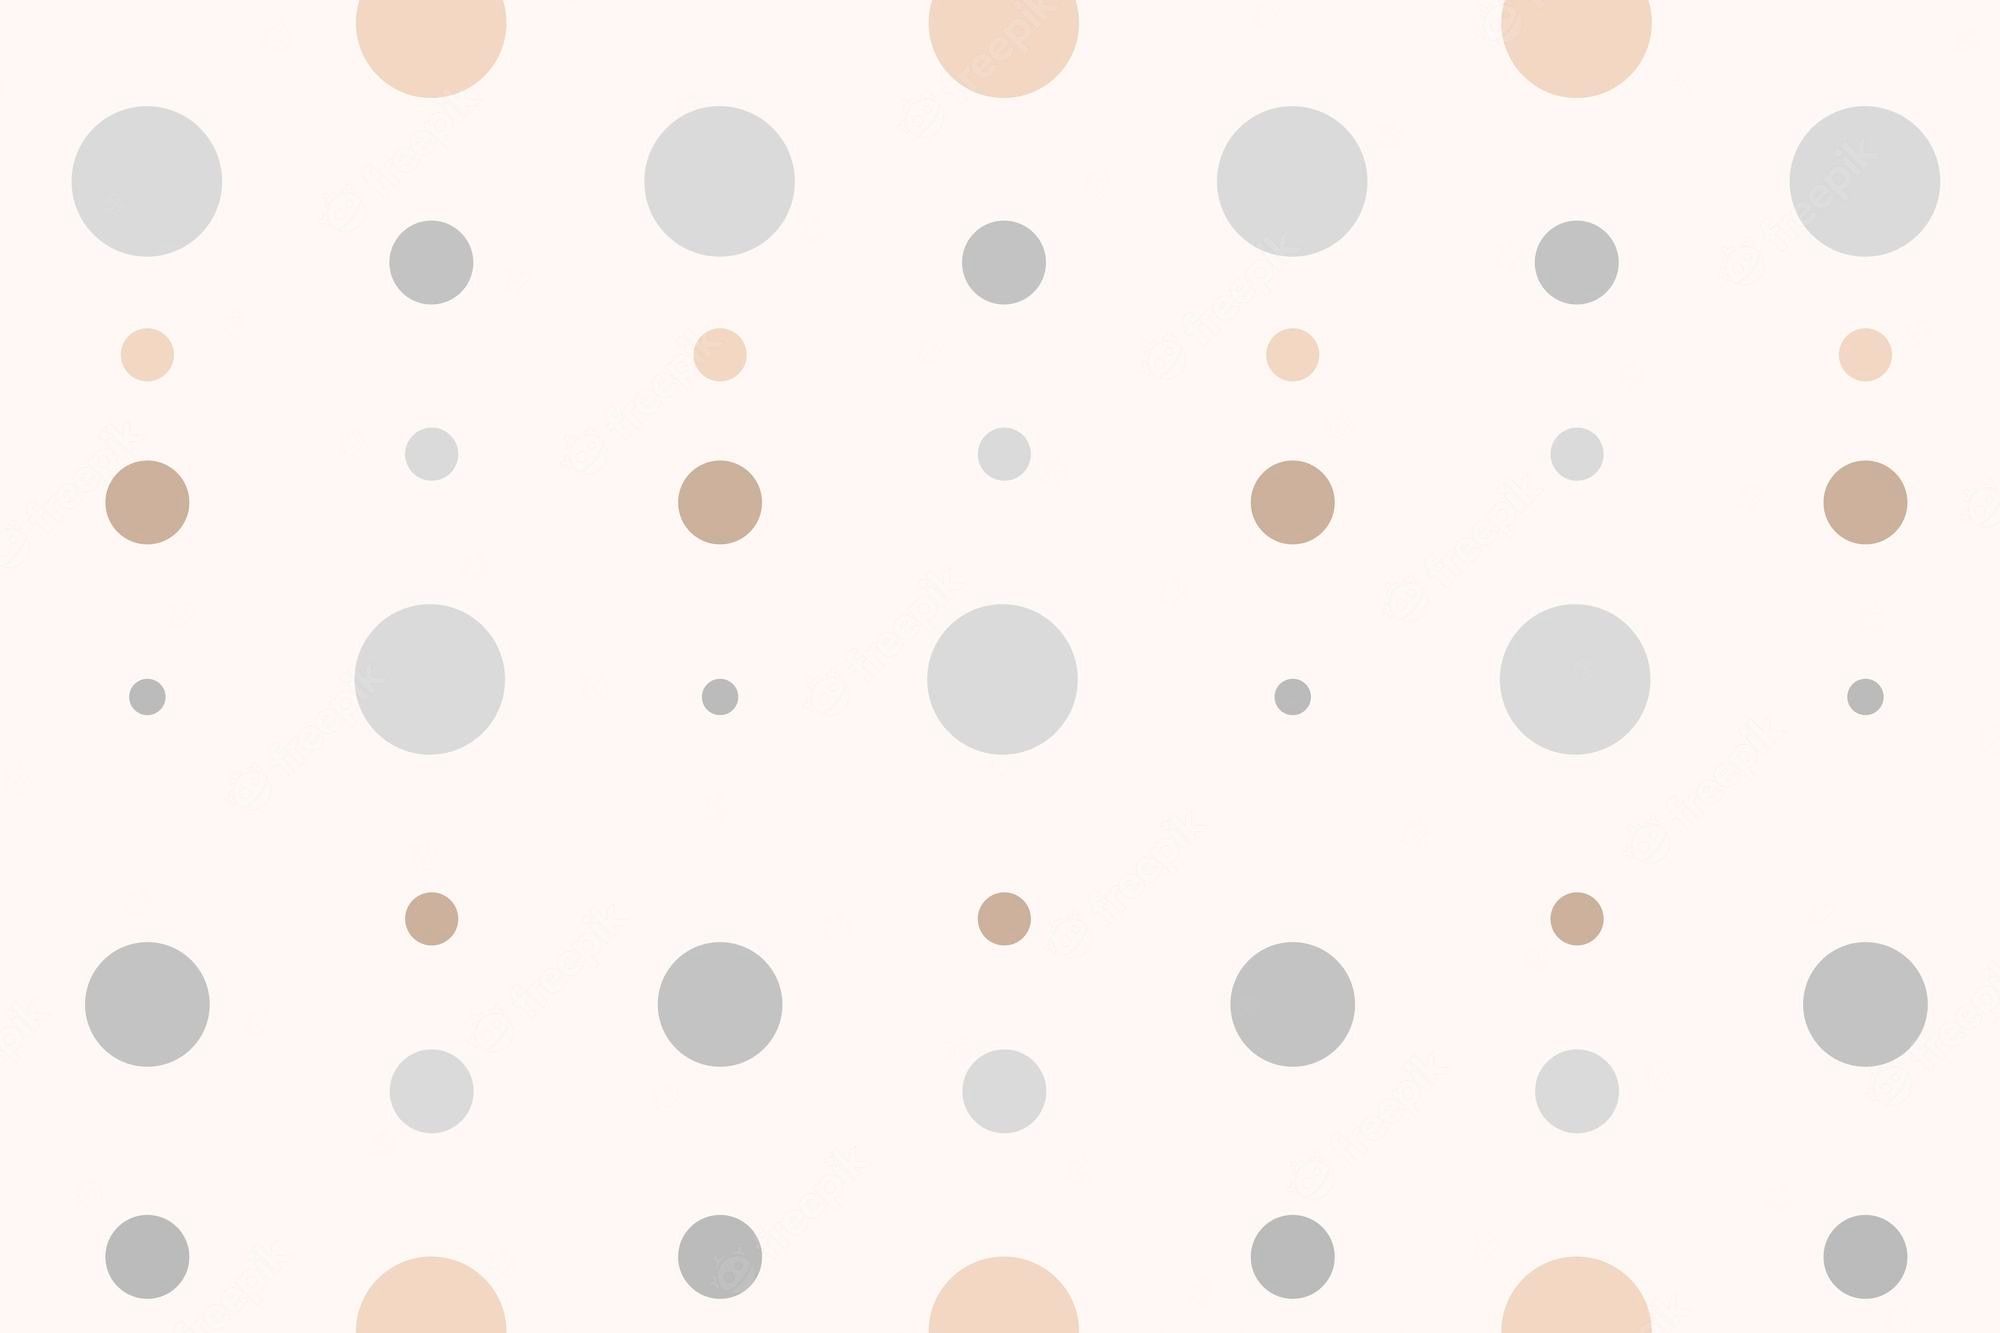 A pattern of dots in different colors - Cream